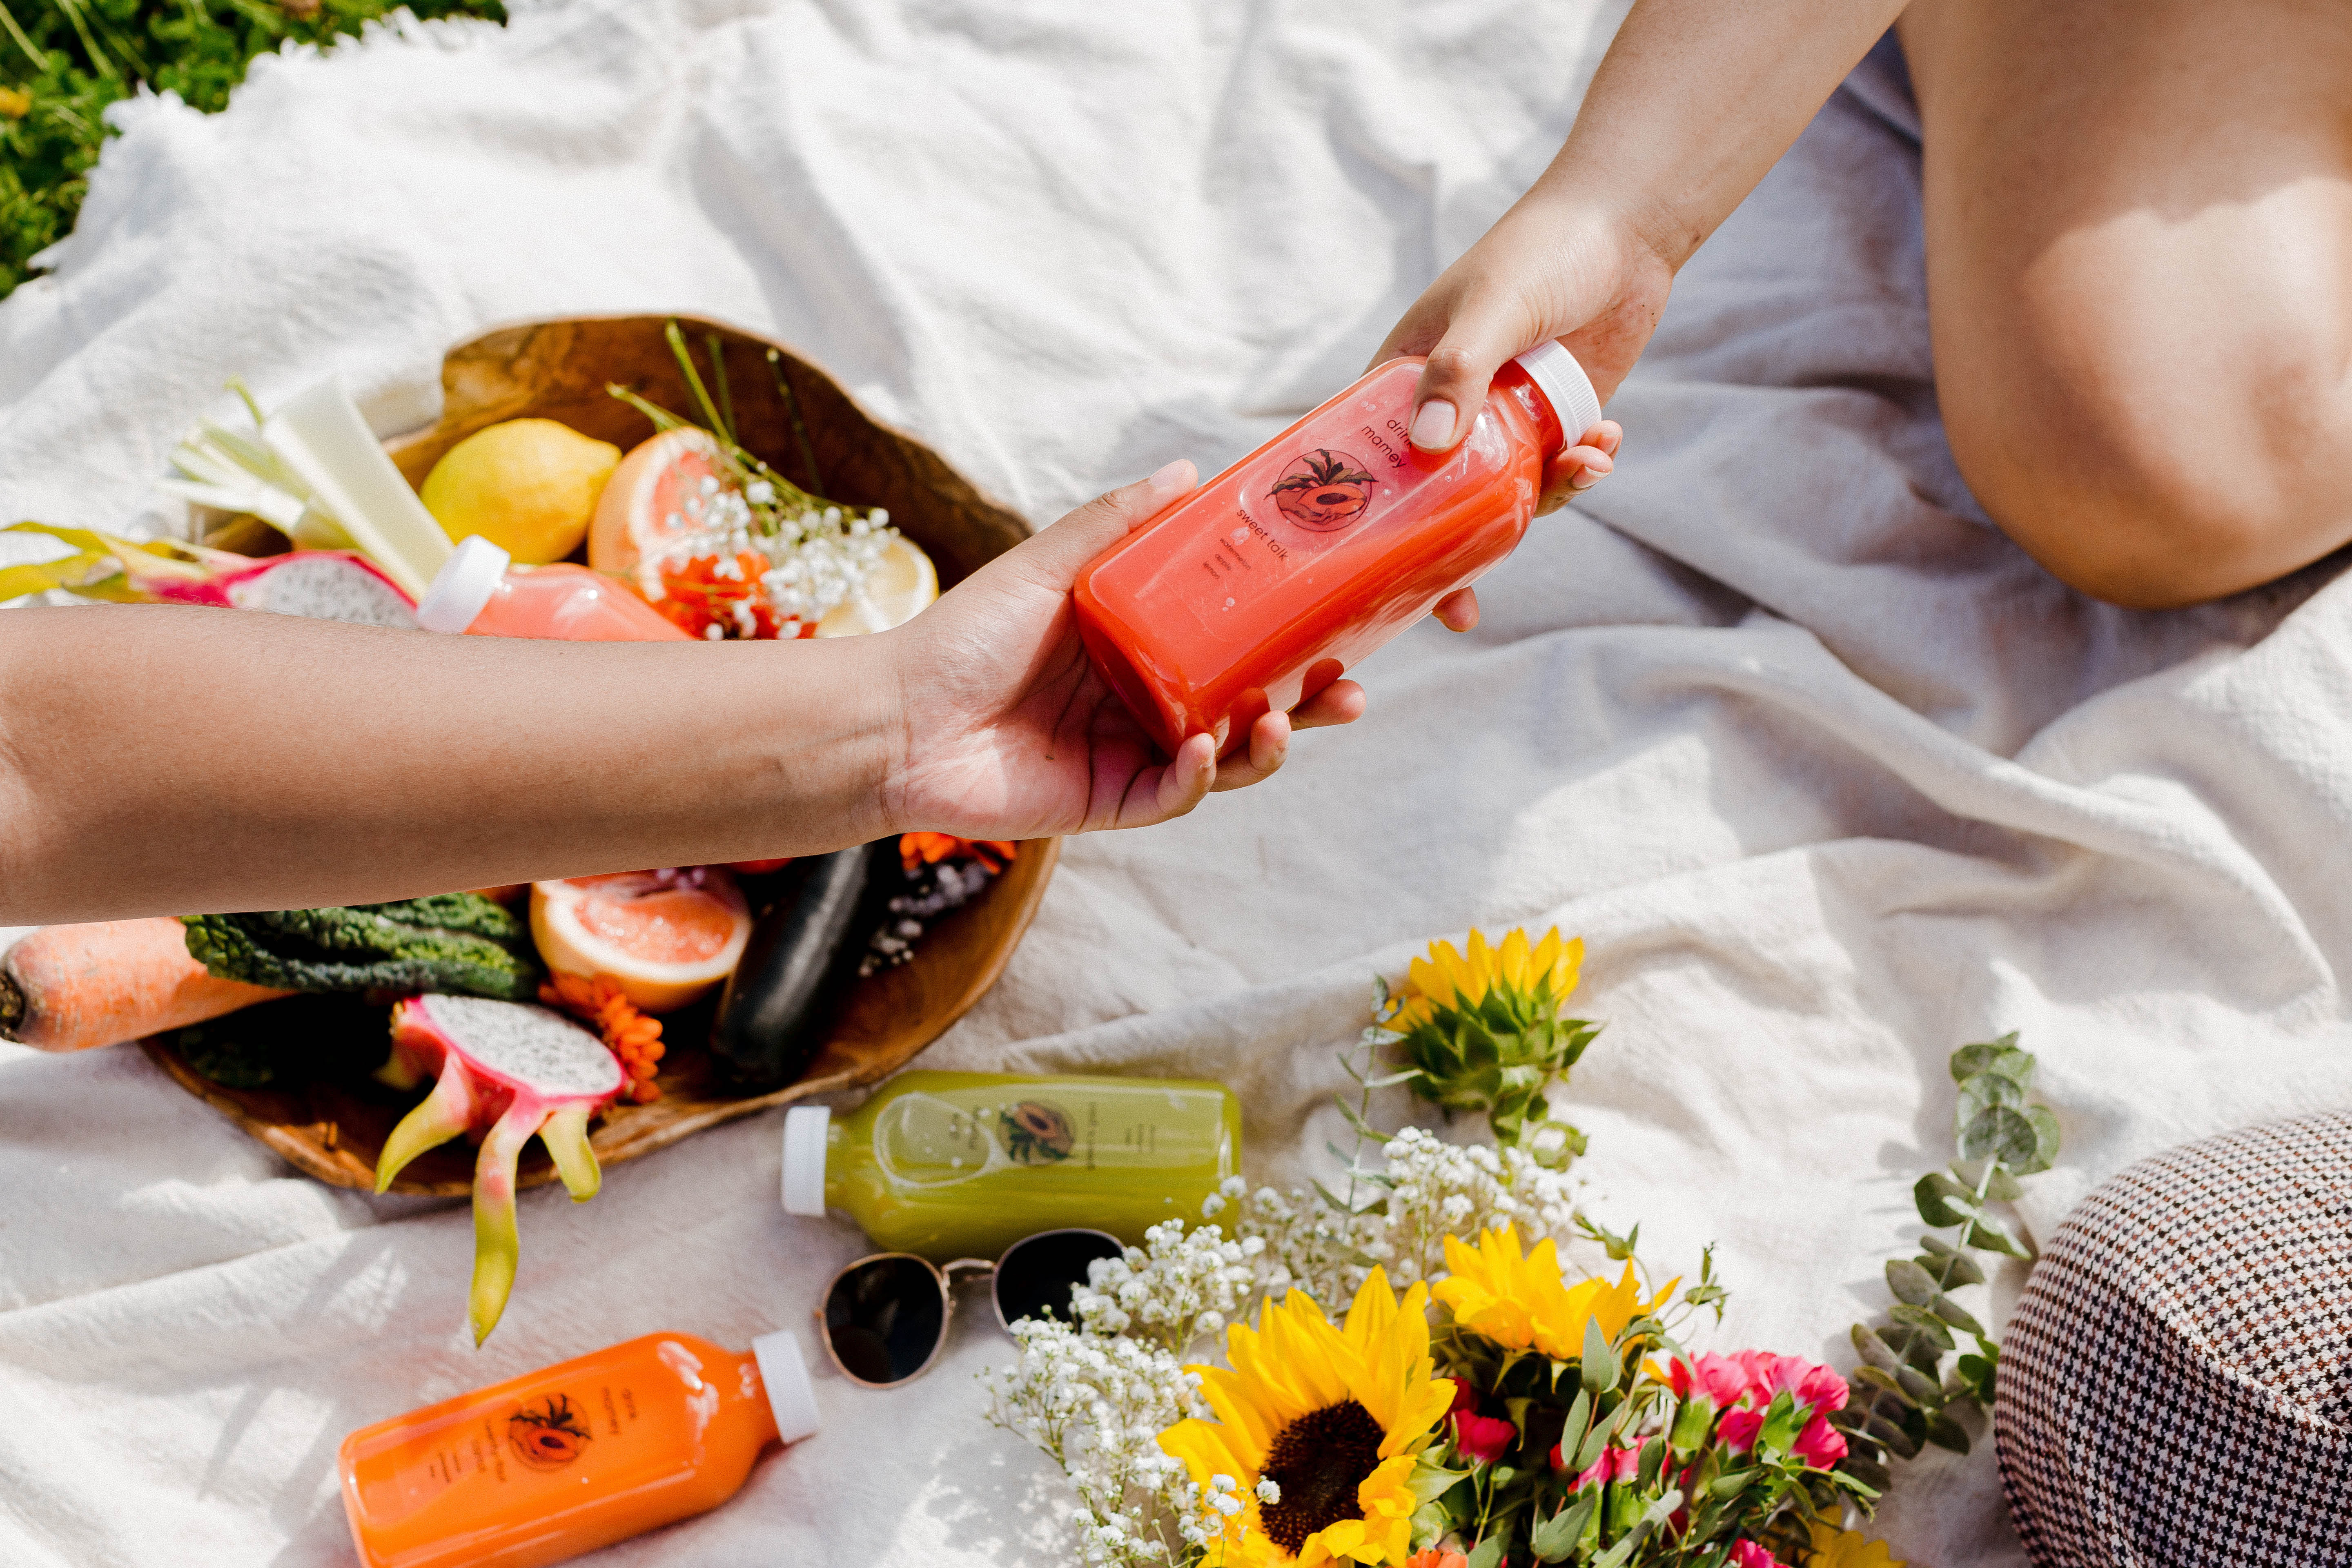 Drink Mamey juices are handed between two people sitting on a blanket at a picnic